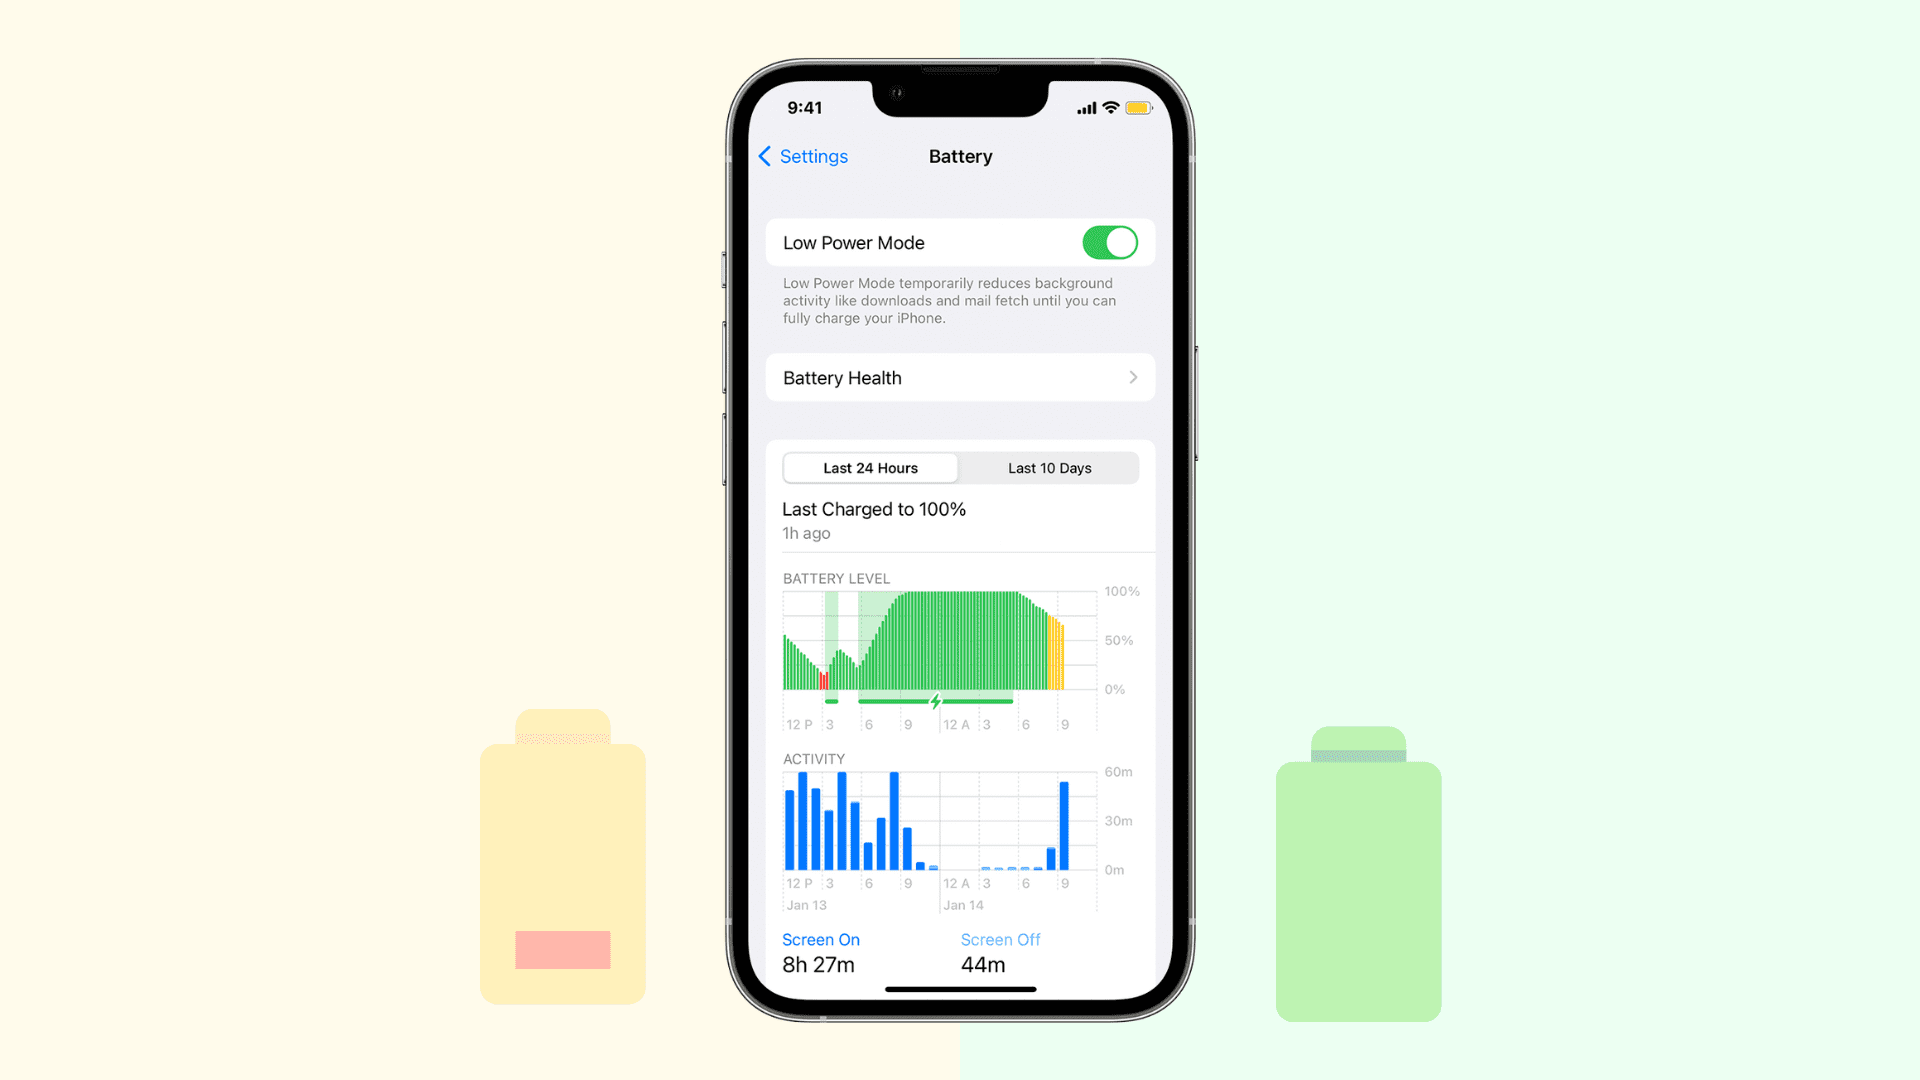 How to enable Low Power Mode on your iPhone or iPad and what happens when you do so